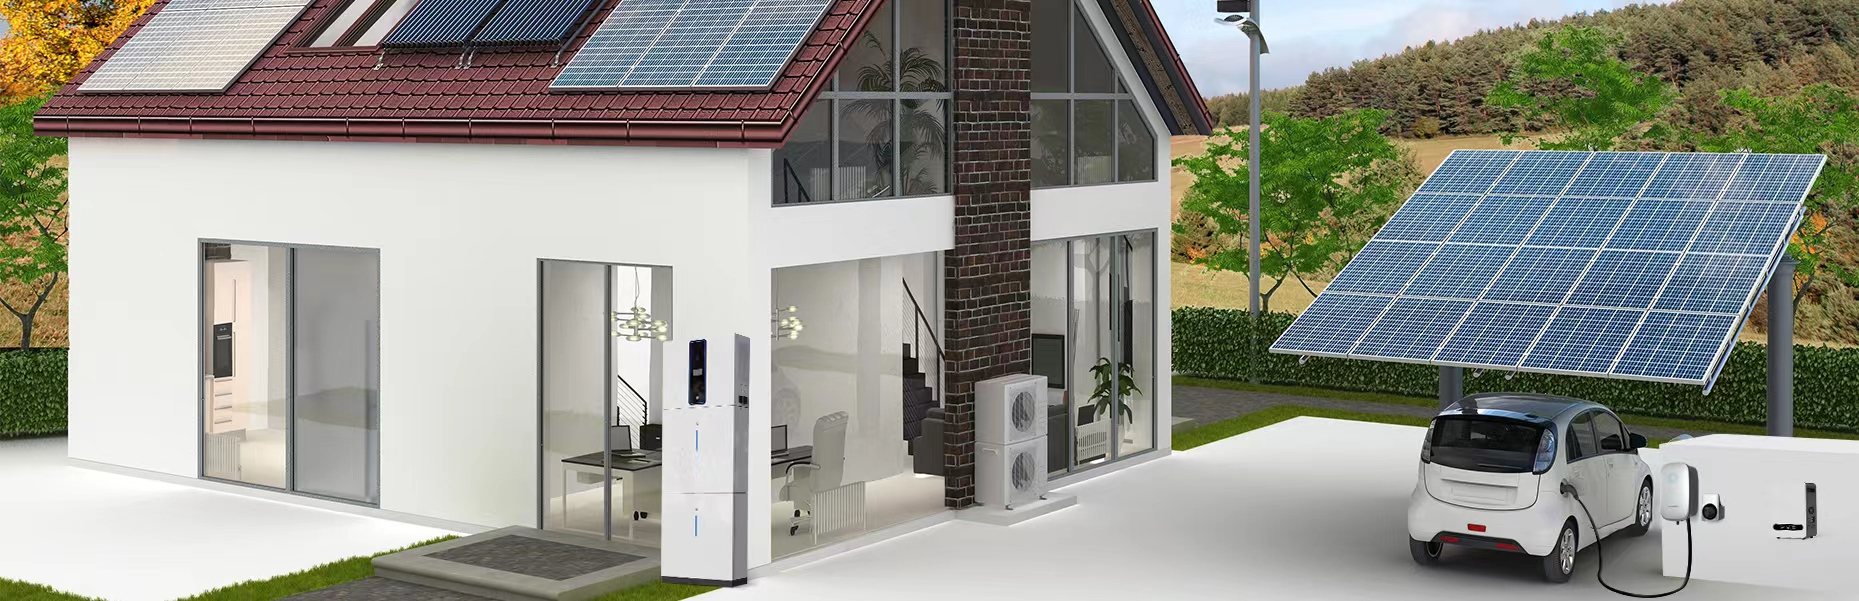 Home Solar EV Charger